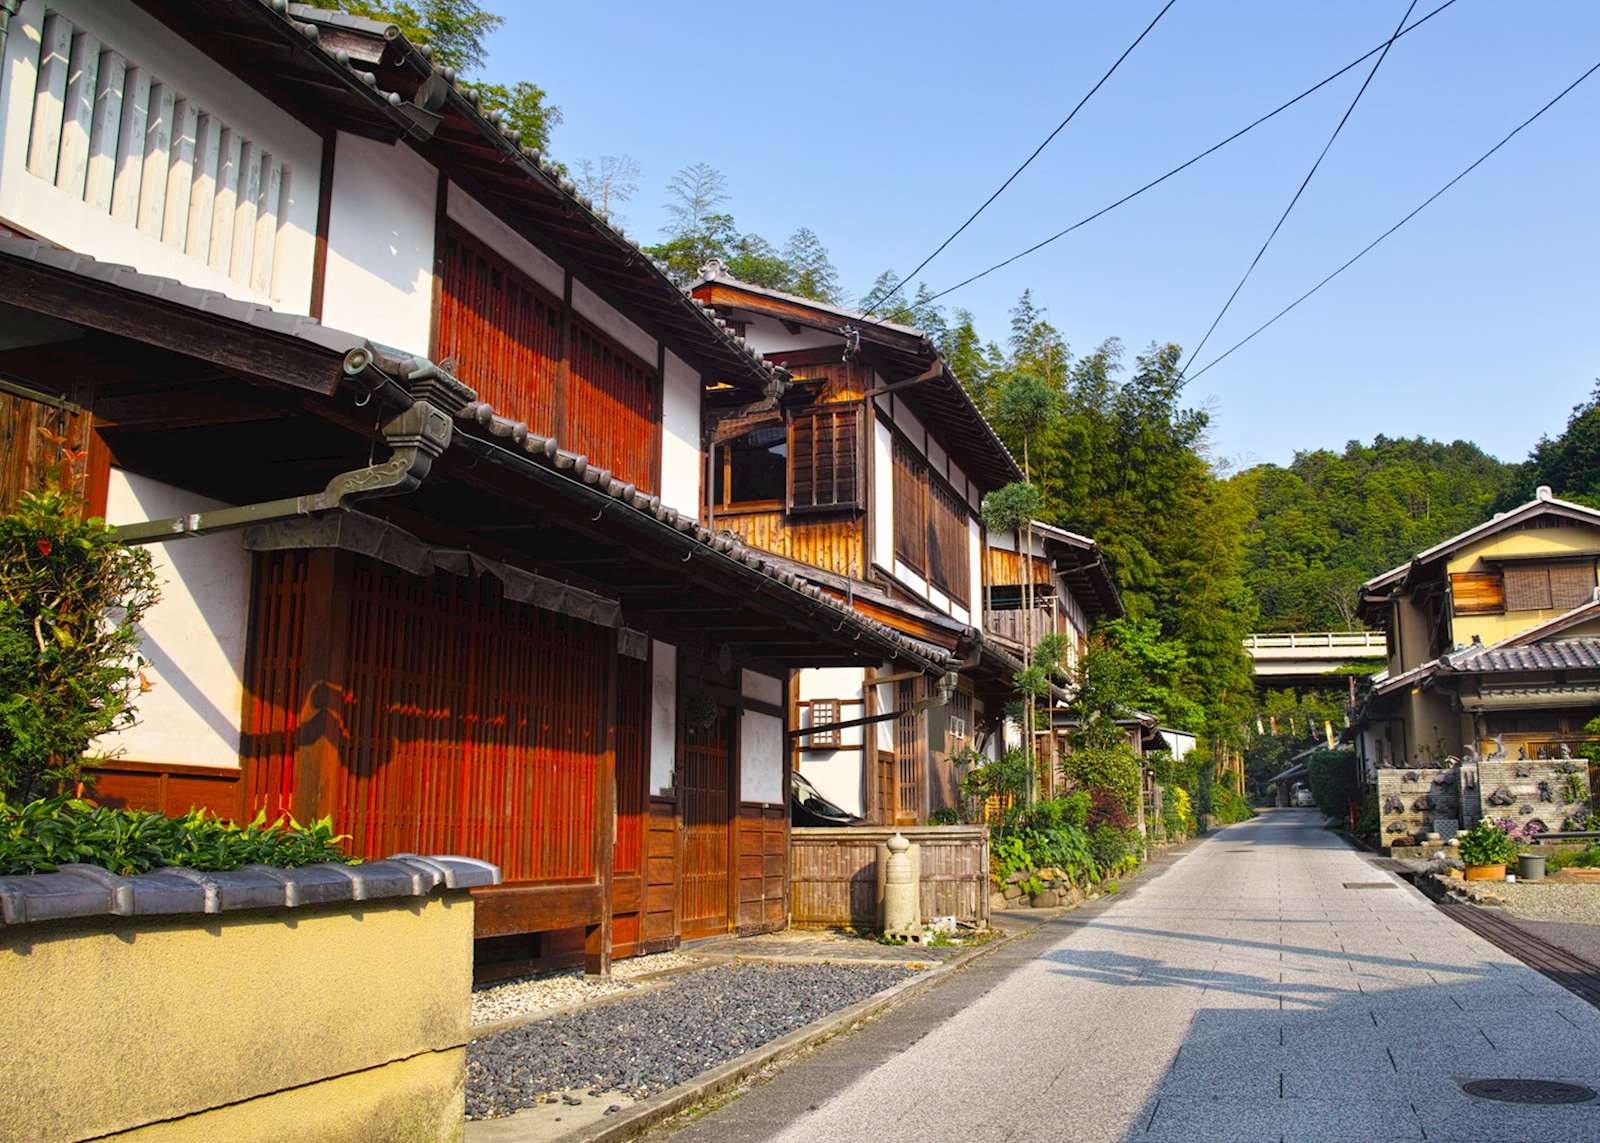 Good-value vacation to Japan | Audley Travel US